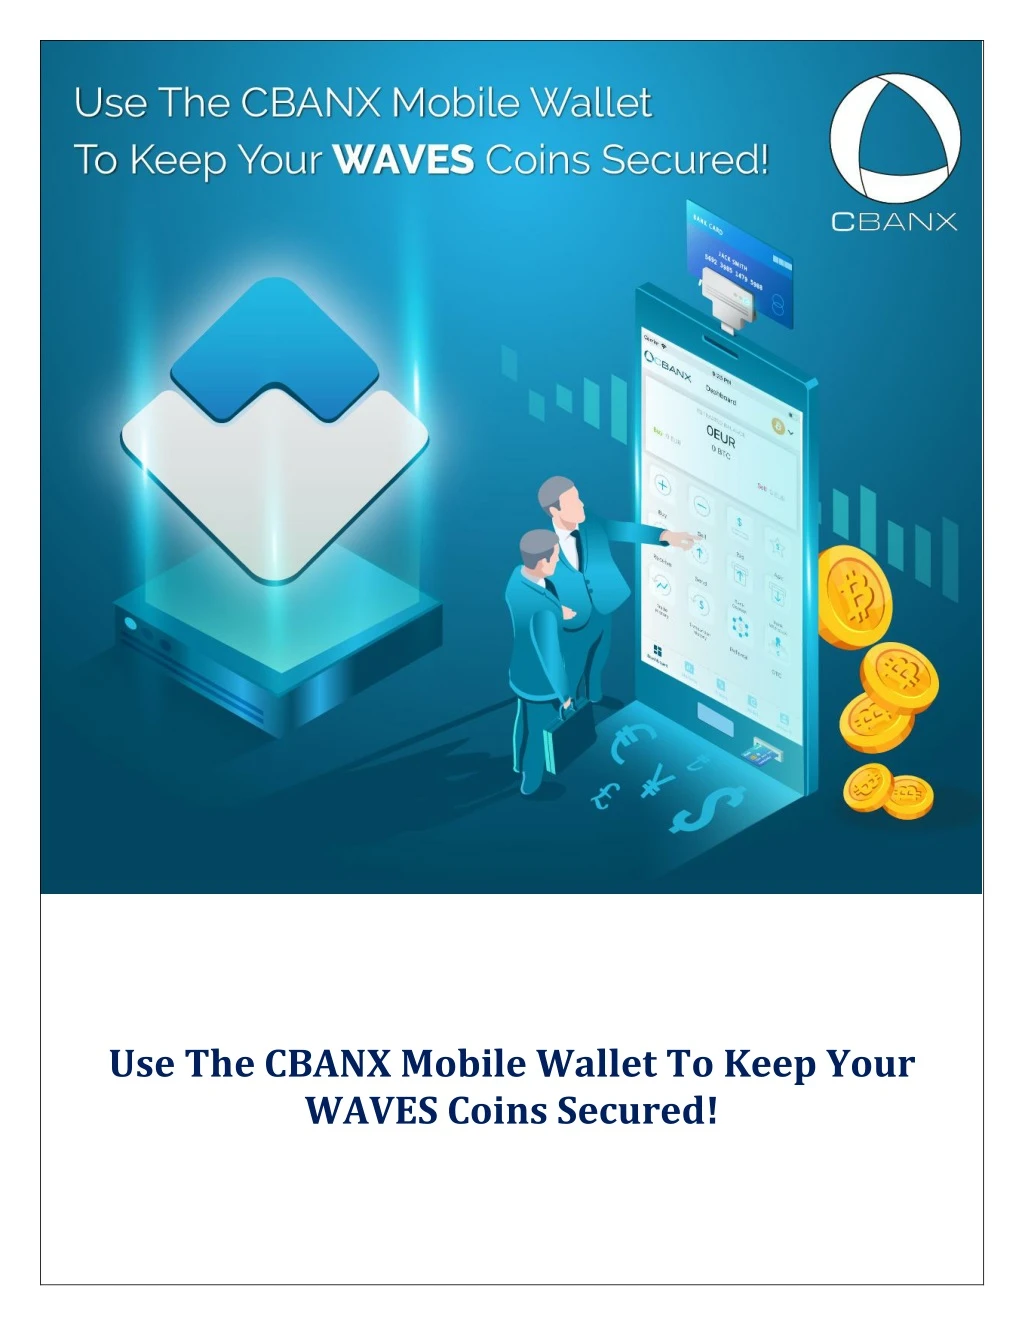 use the cbanx mobile wallet to keep your waves